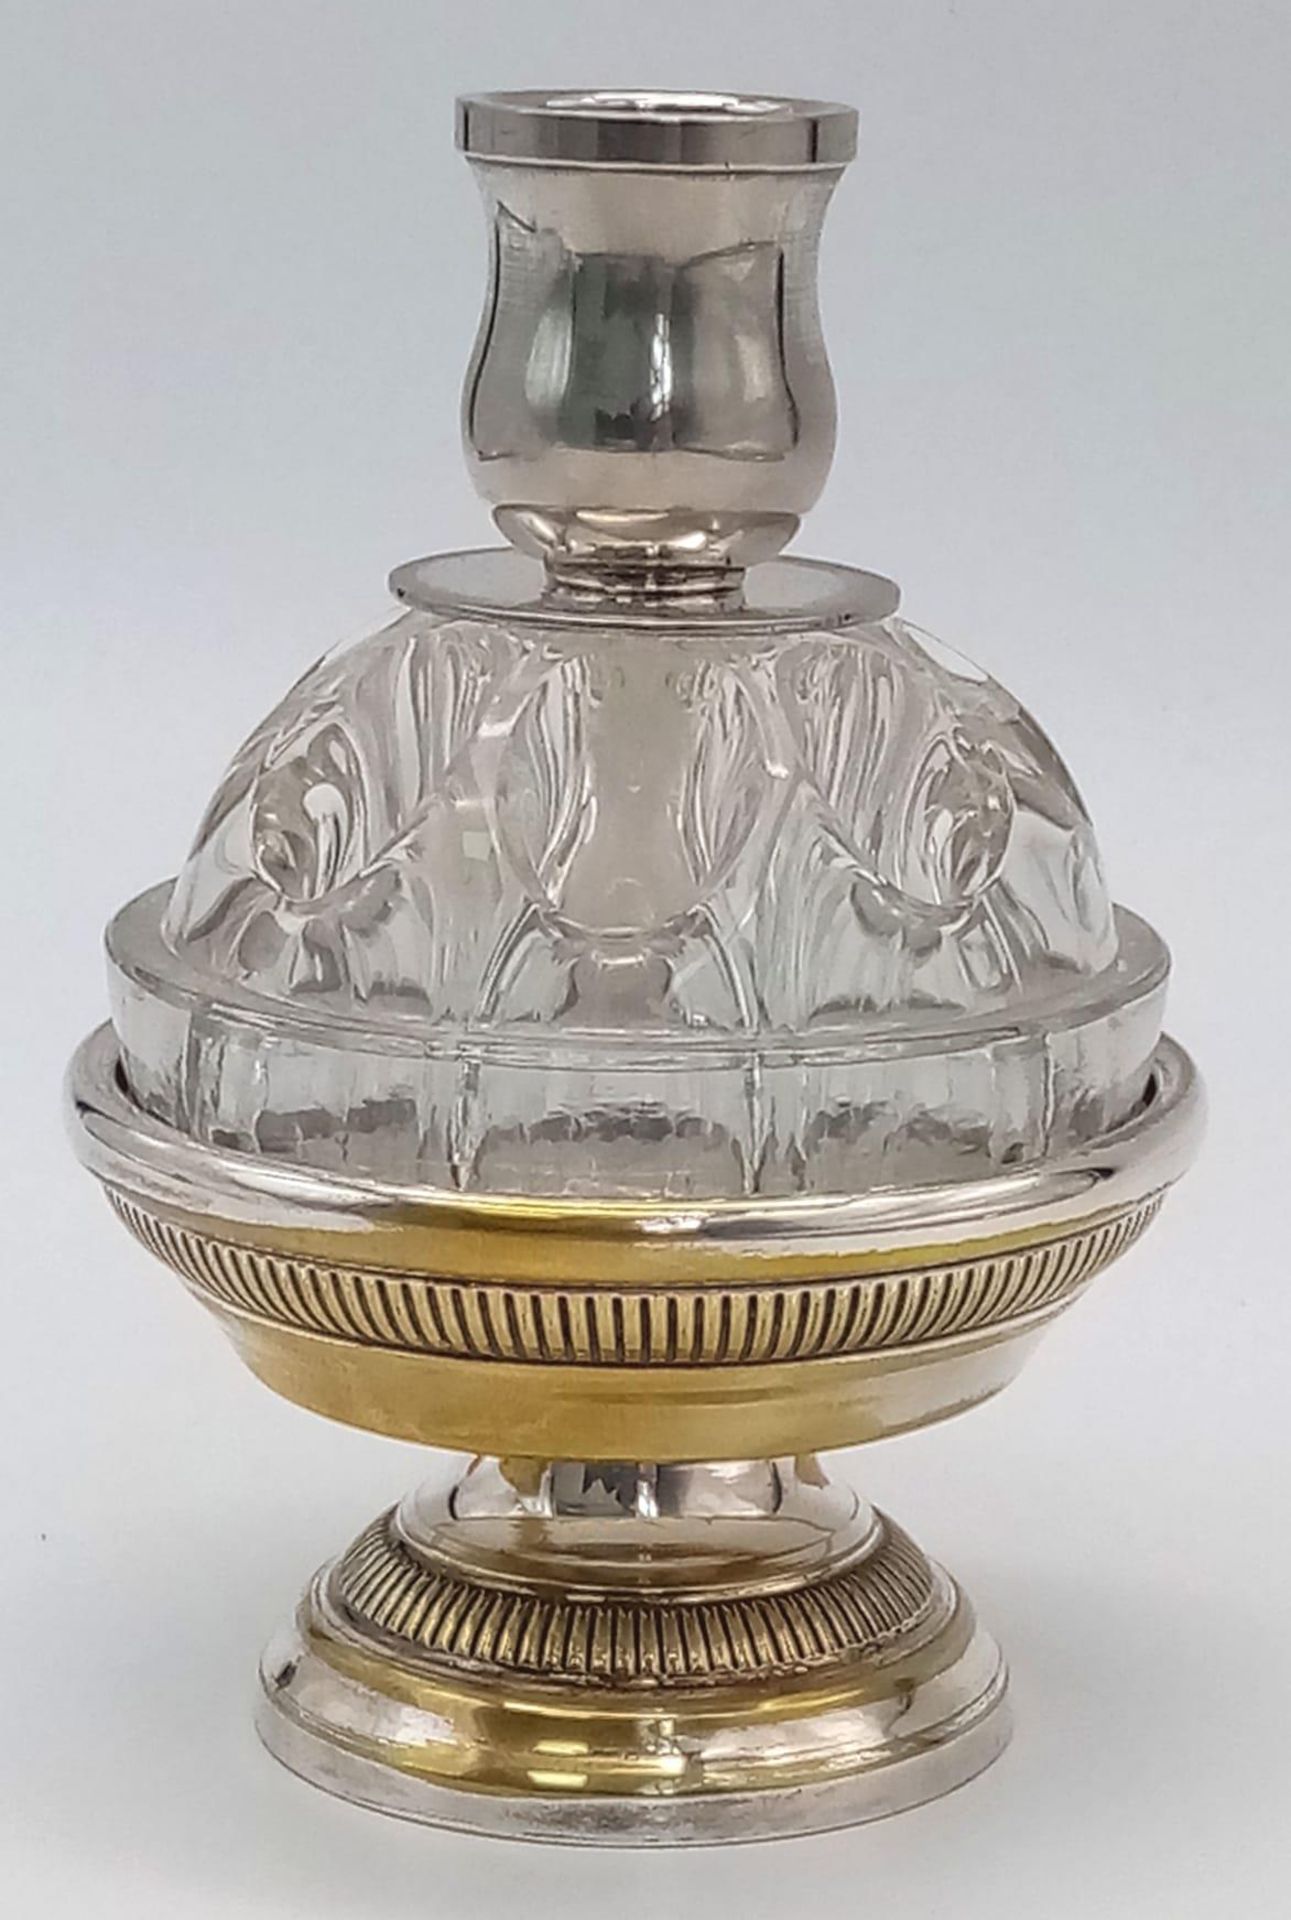 A Vintage Glass Oil Burner by French Designer Michel Dartois, 12cm in Height, No chips to the glass.